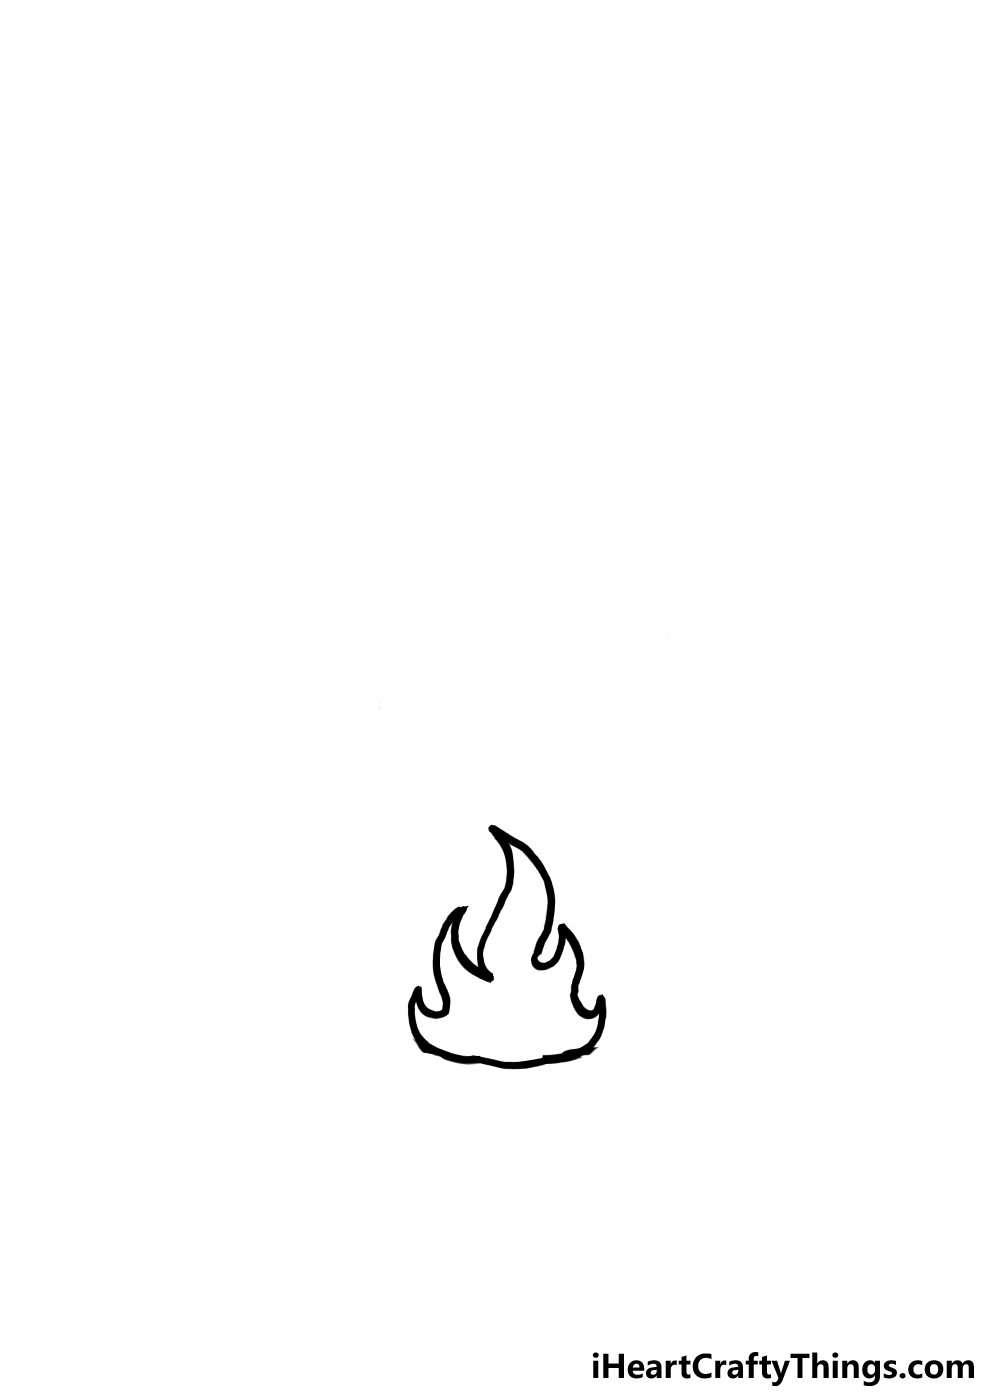 How to Draw Flames step 2